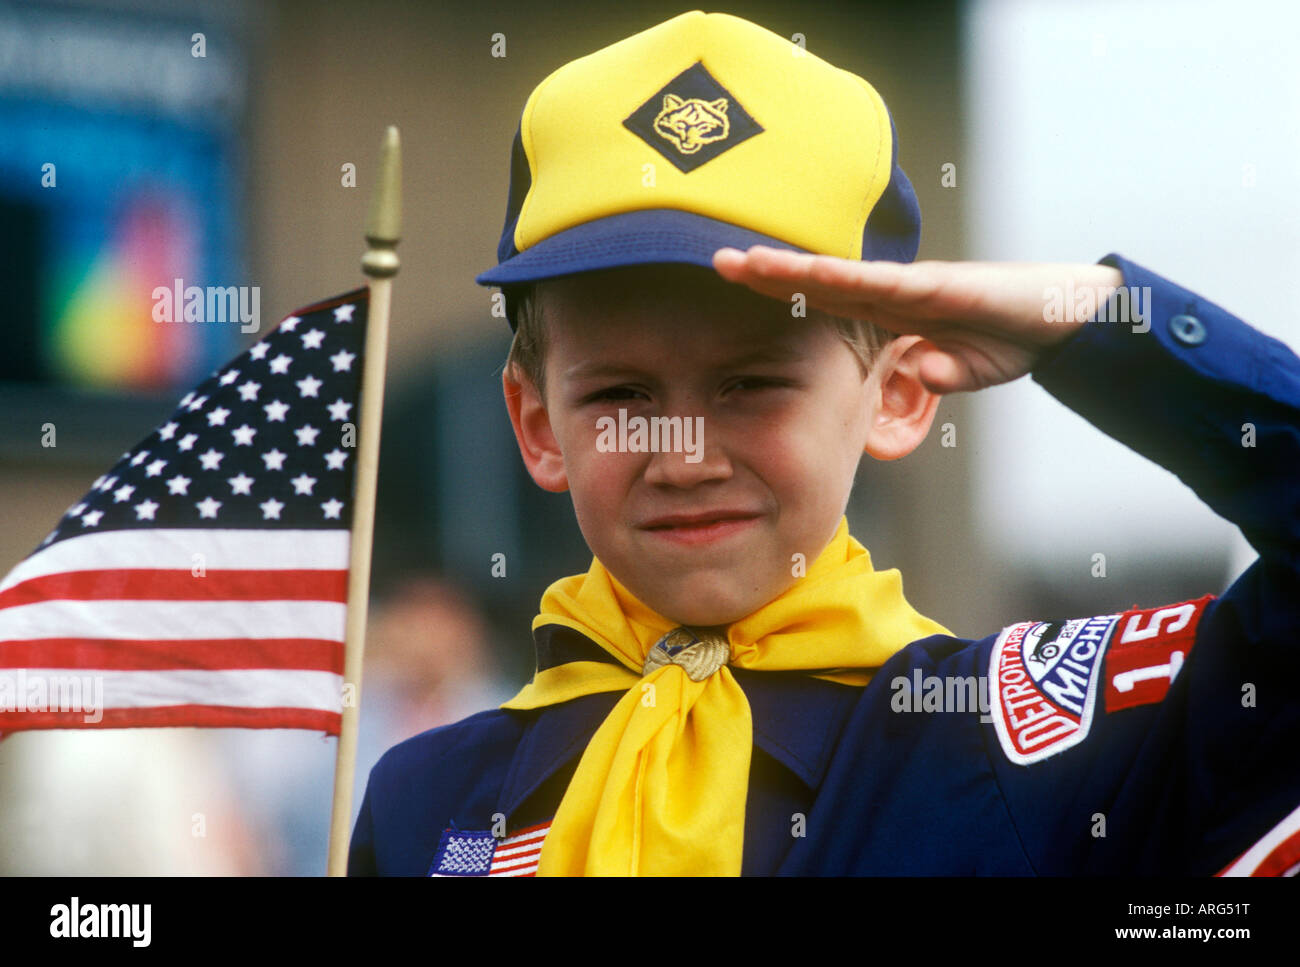 American Cub Scout salutes as he holds an American flag Stock Photo